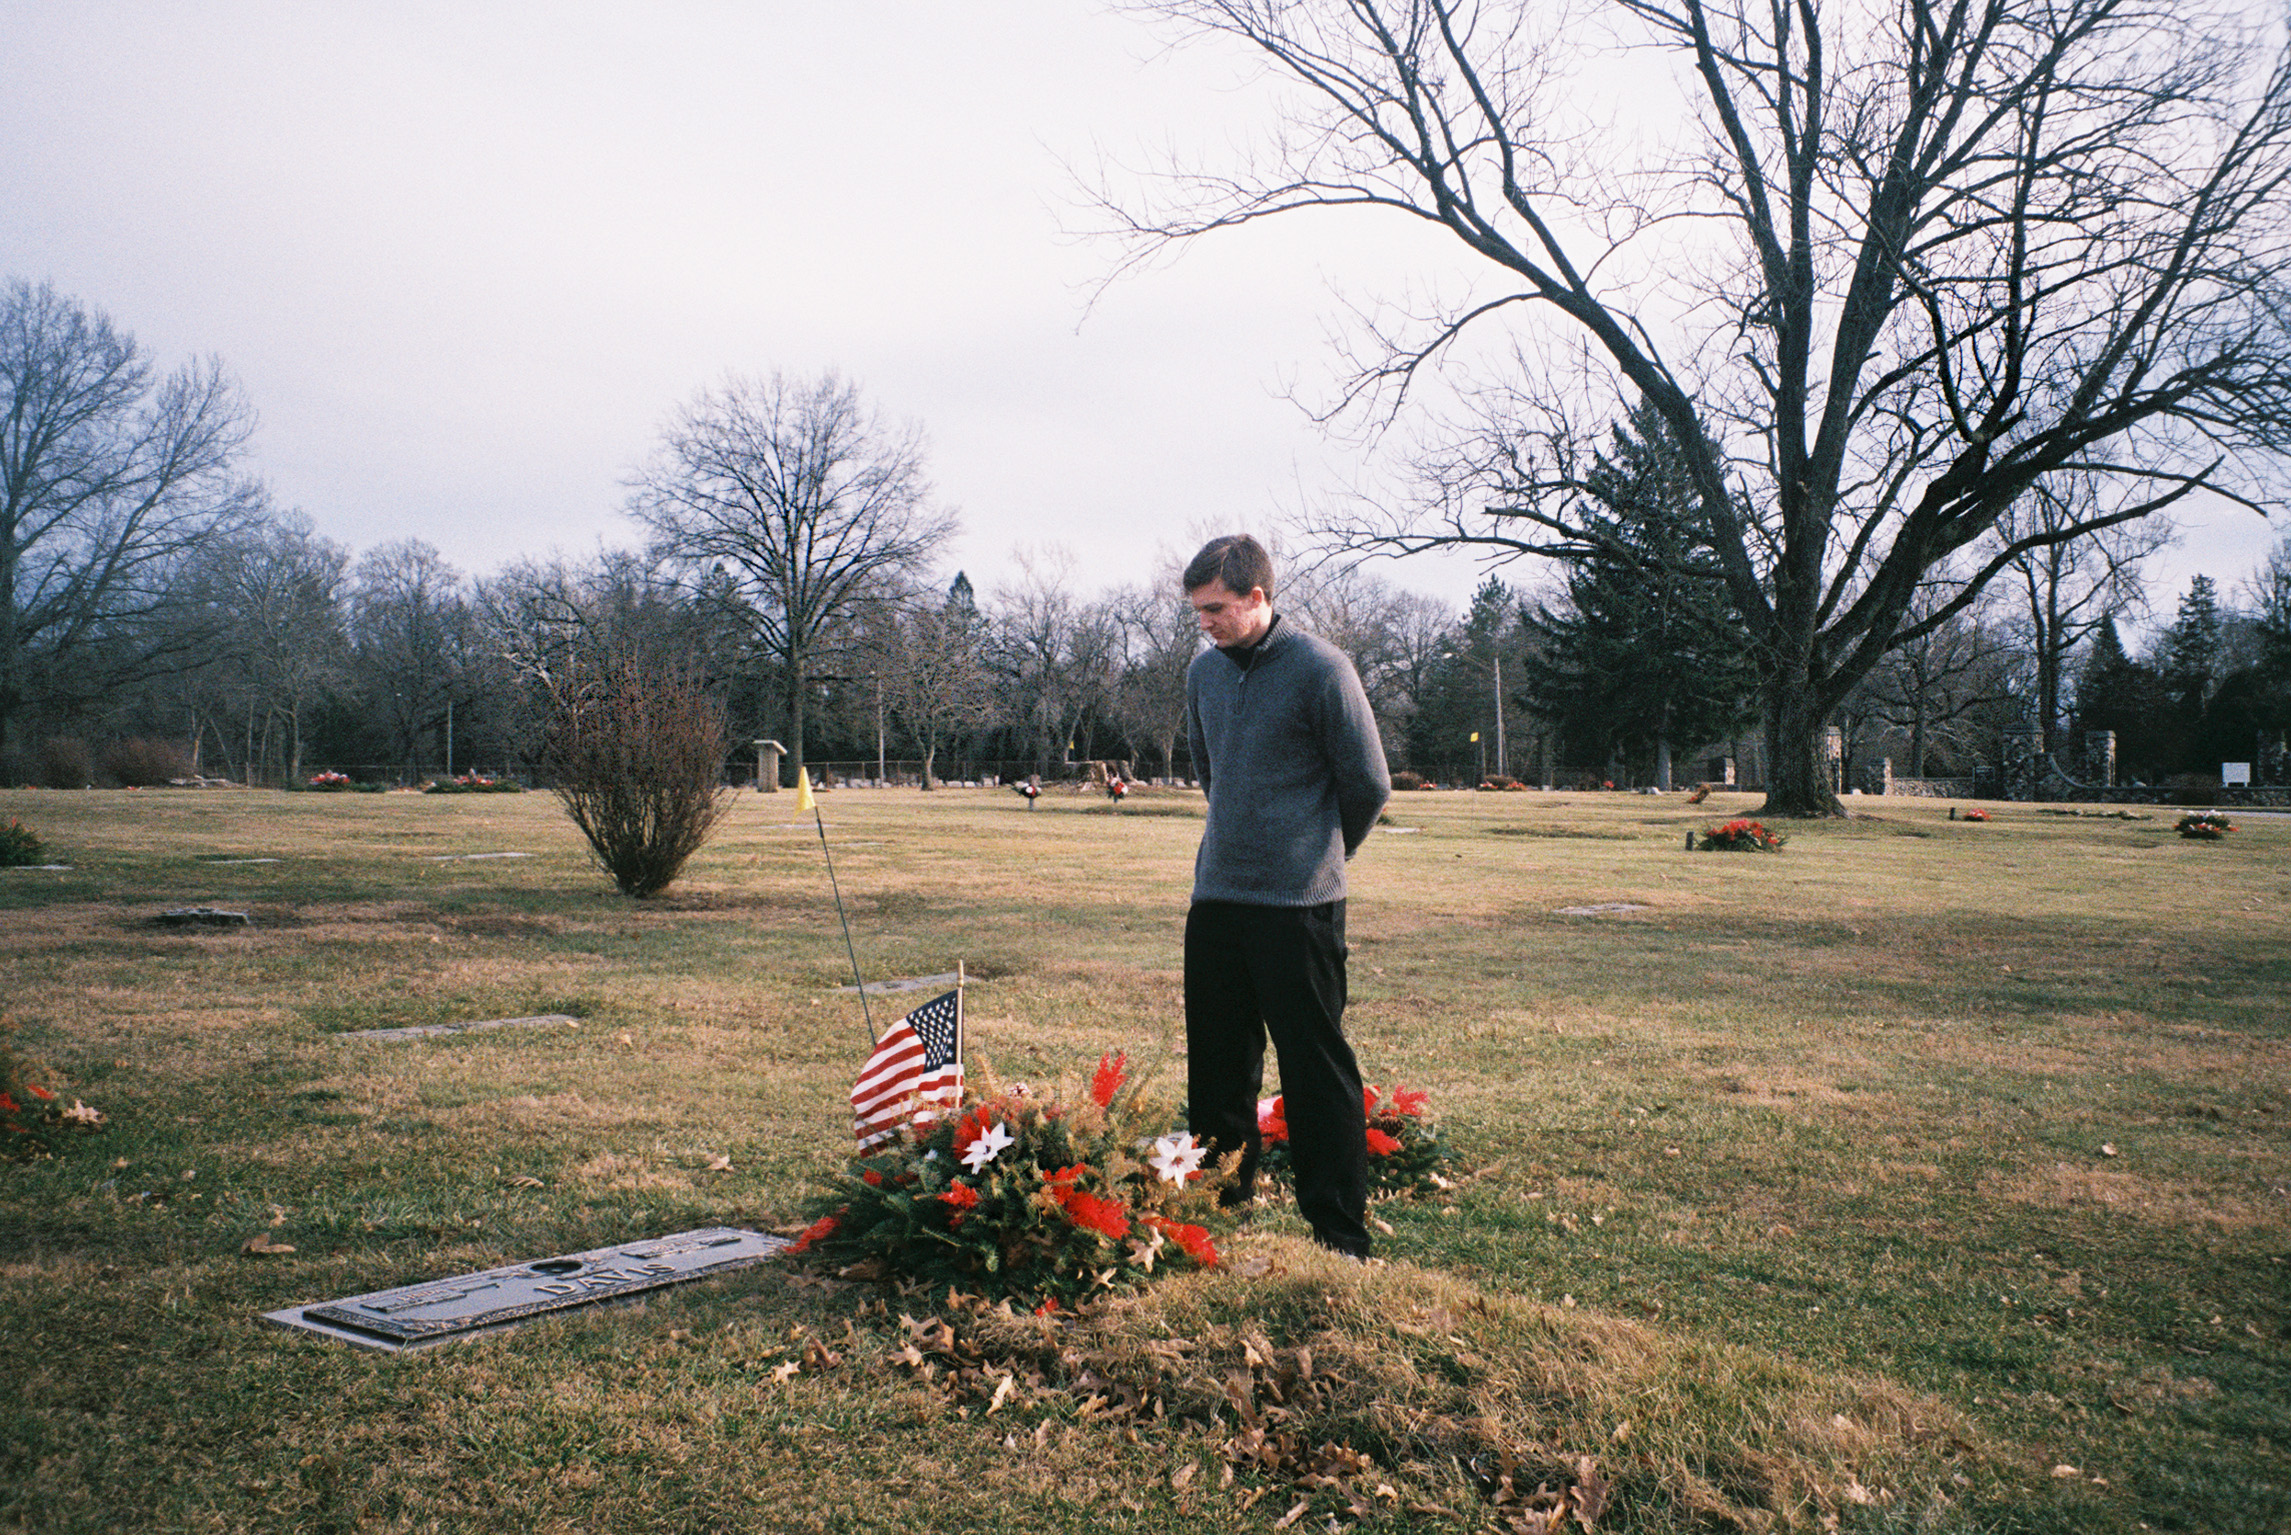  Brian mourns his late grandfather at Spring Hill cemetery in Danville. With his grandfather no longer needing assistance, Brian prepares to make his next move to Fountain, Colorado, a town that is known to be home to thousands of active and inactive